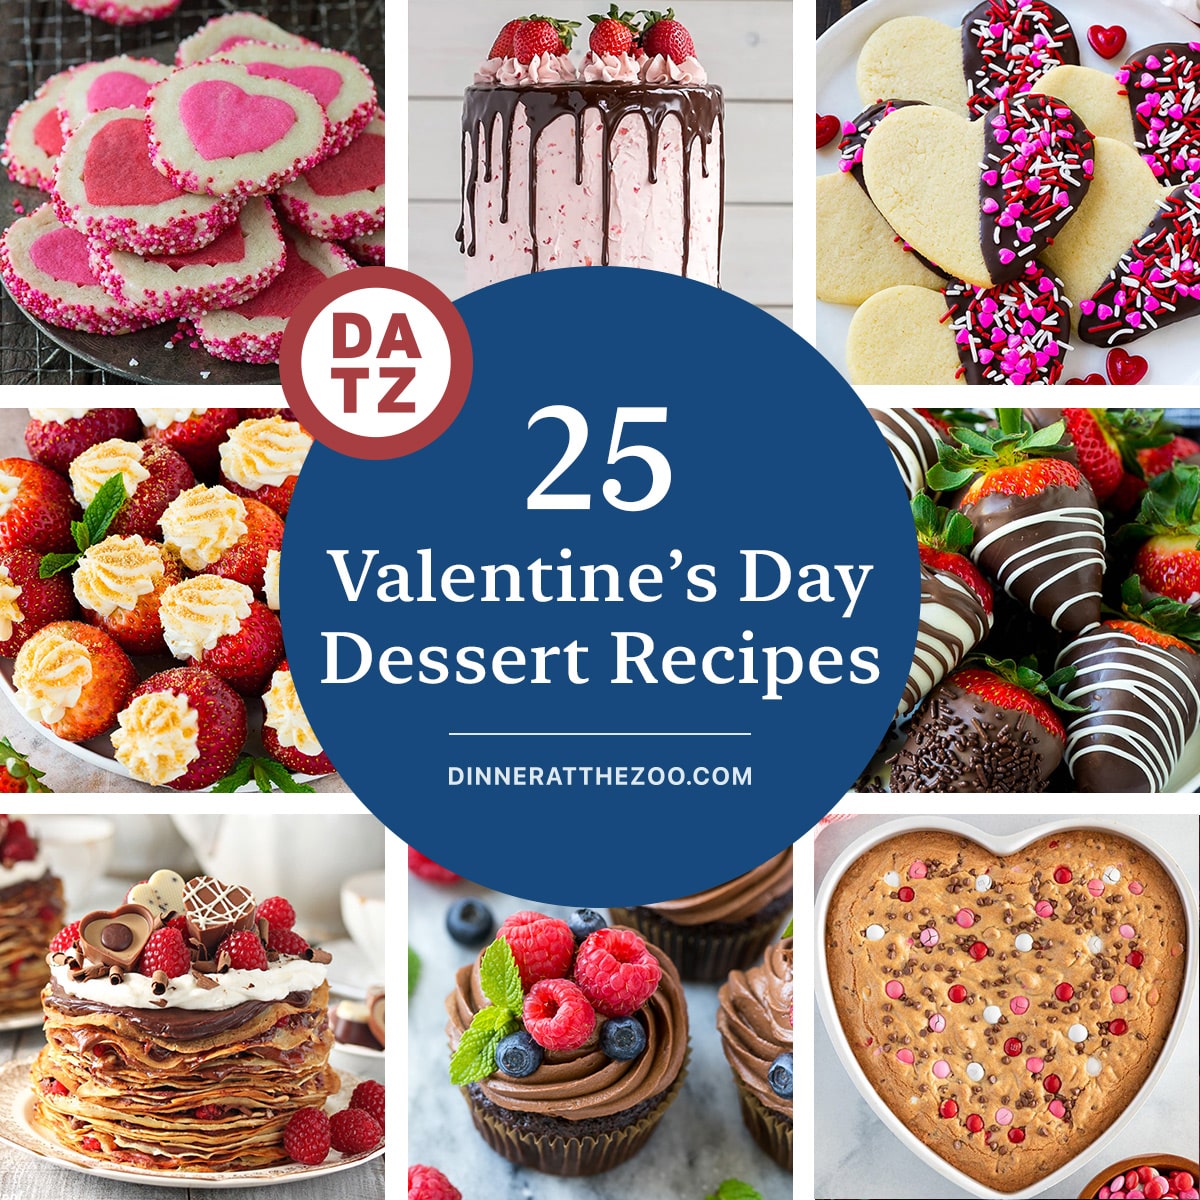 A group of images of Valentine's Day dessert recipes such as heart cookies, chocolate strawberry cake and chocolate covered strawberries.